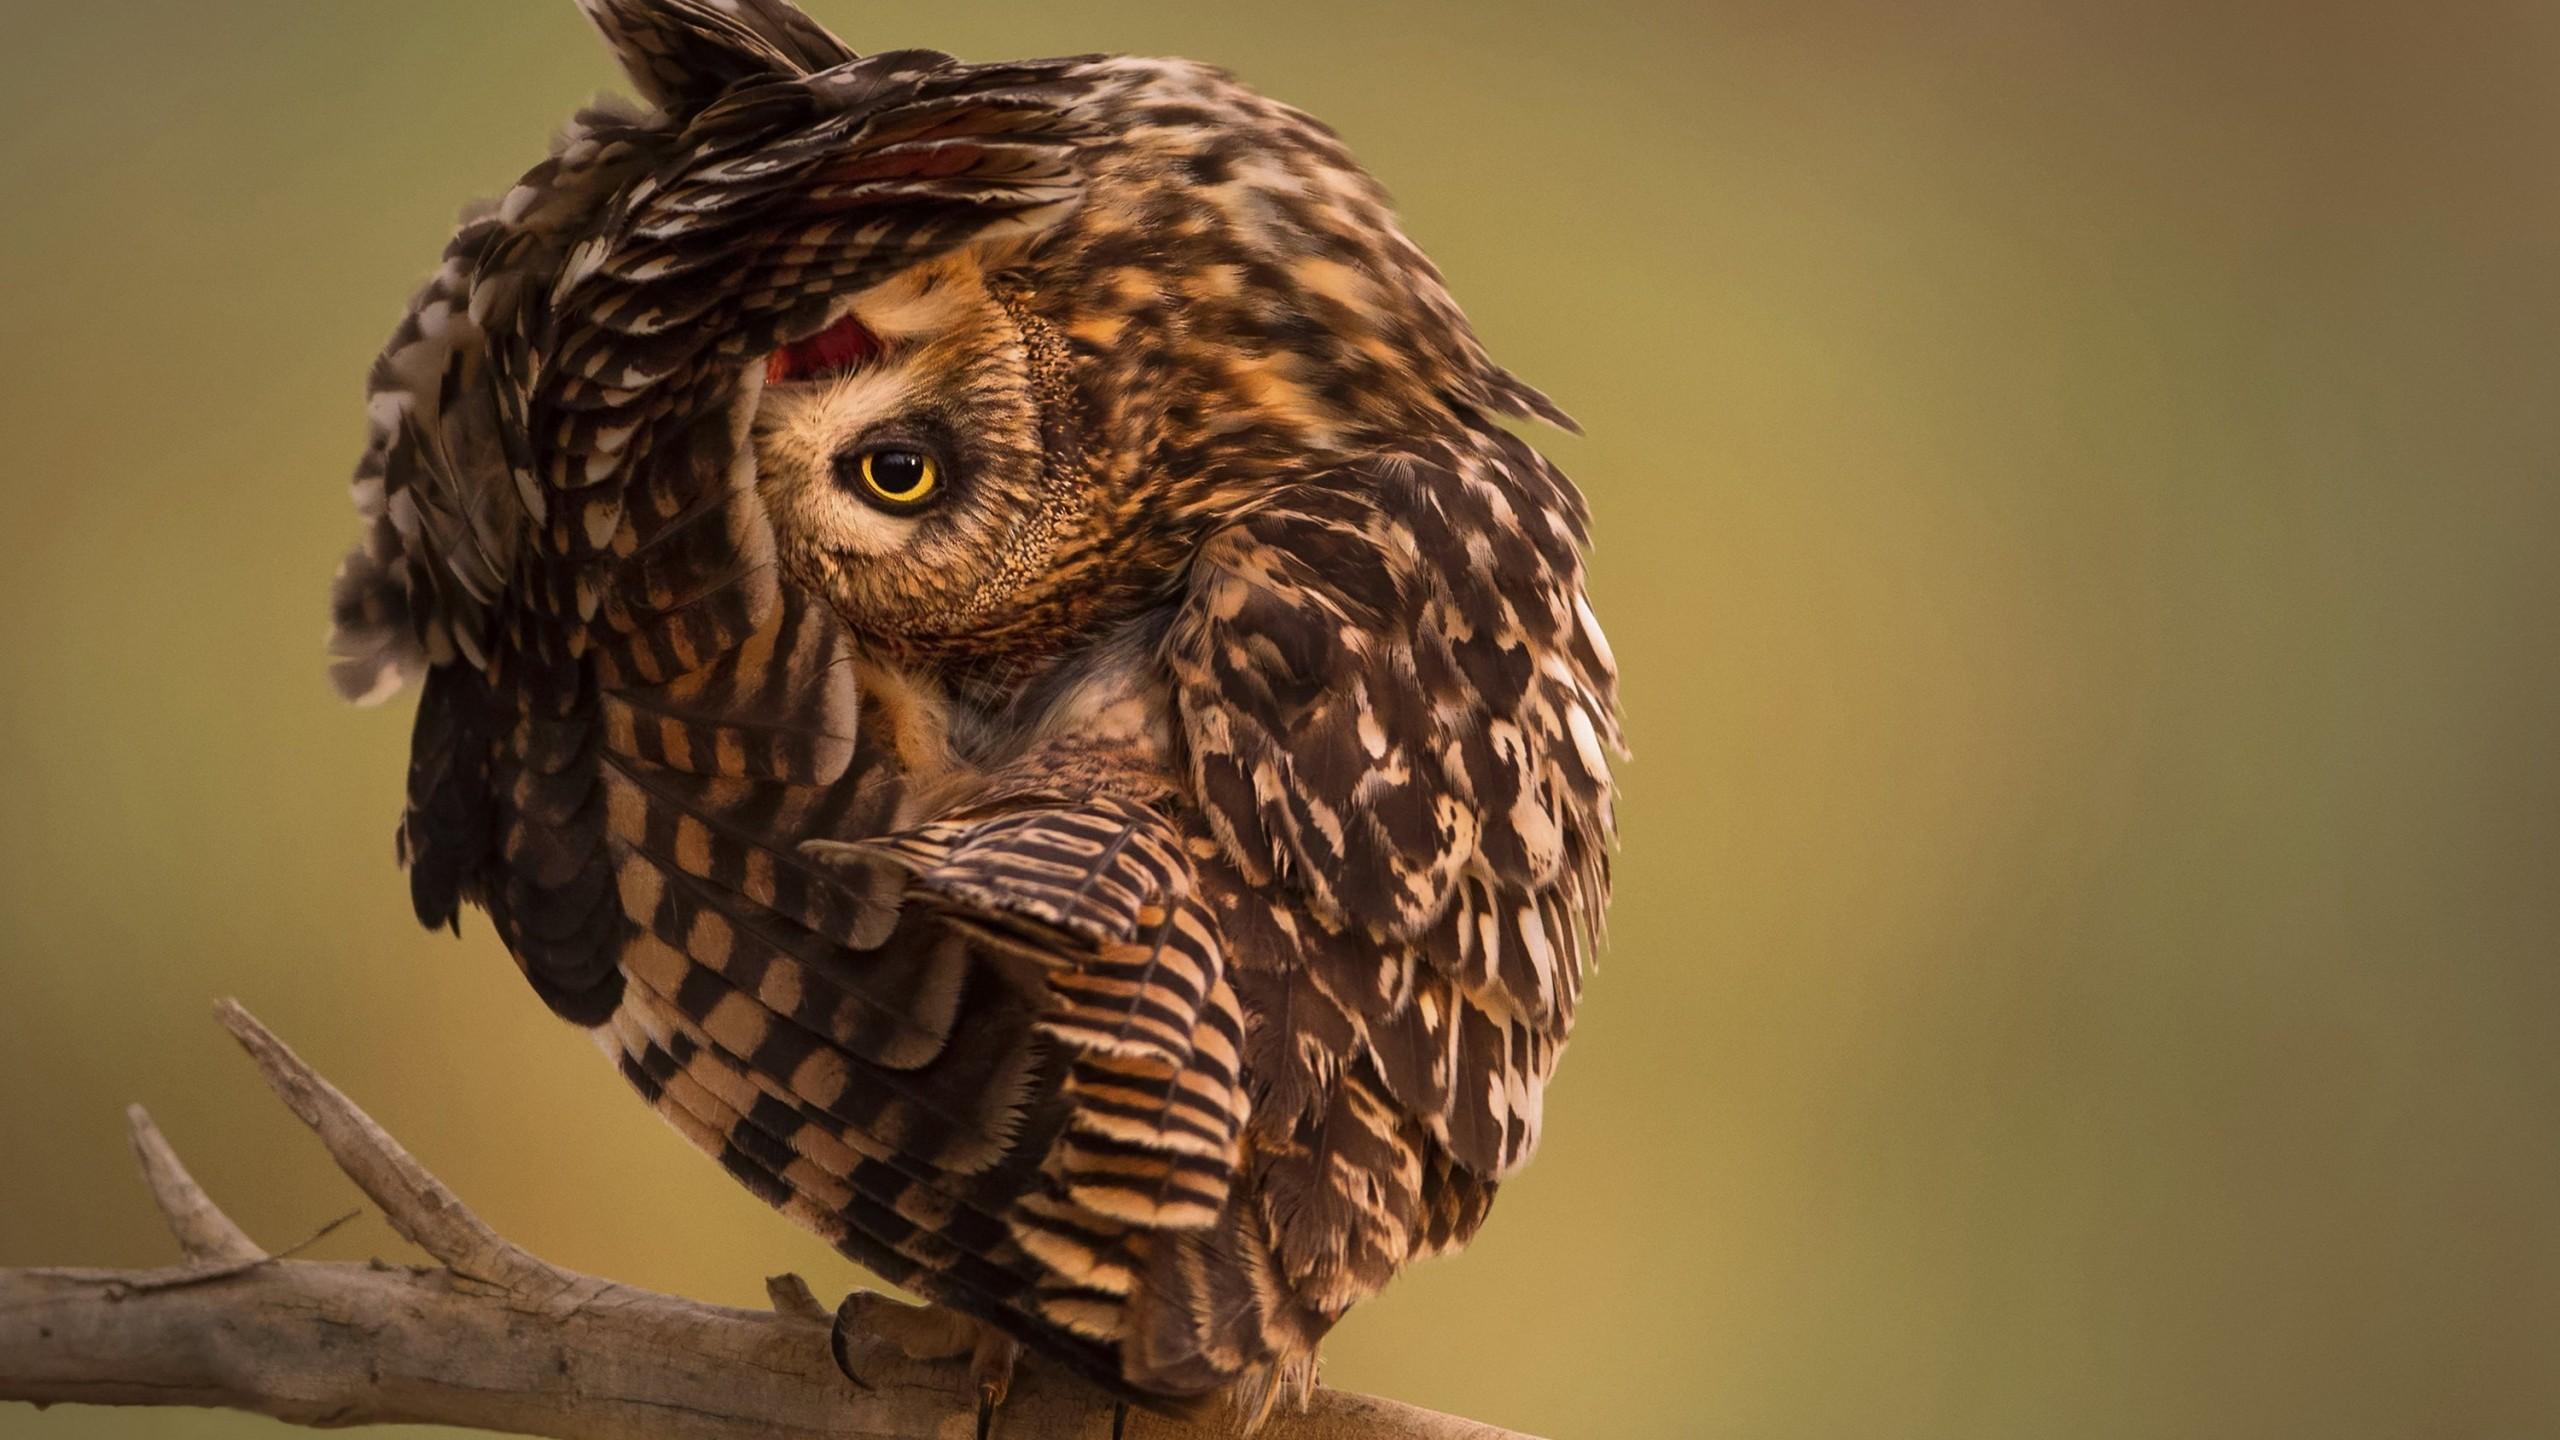 Wallpaper National Geographic, 4k, HD wallpaper, Owl, Funny, OS